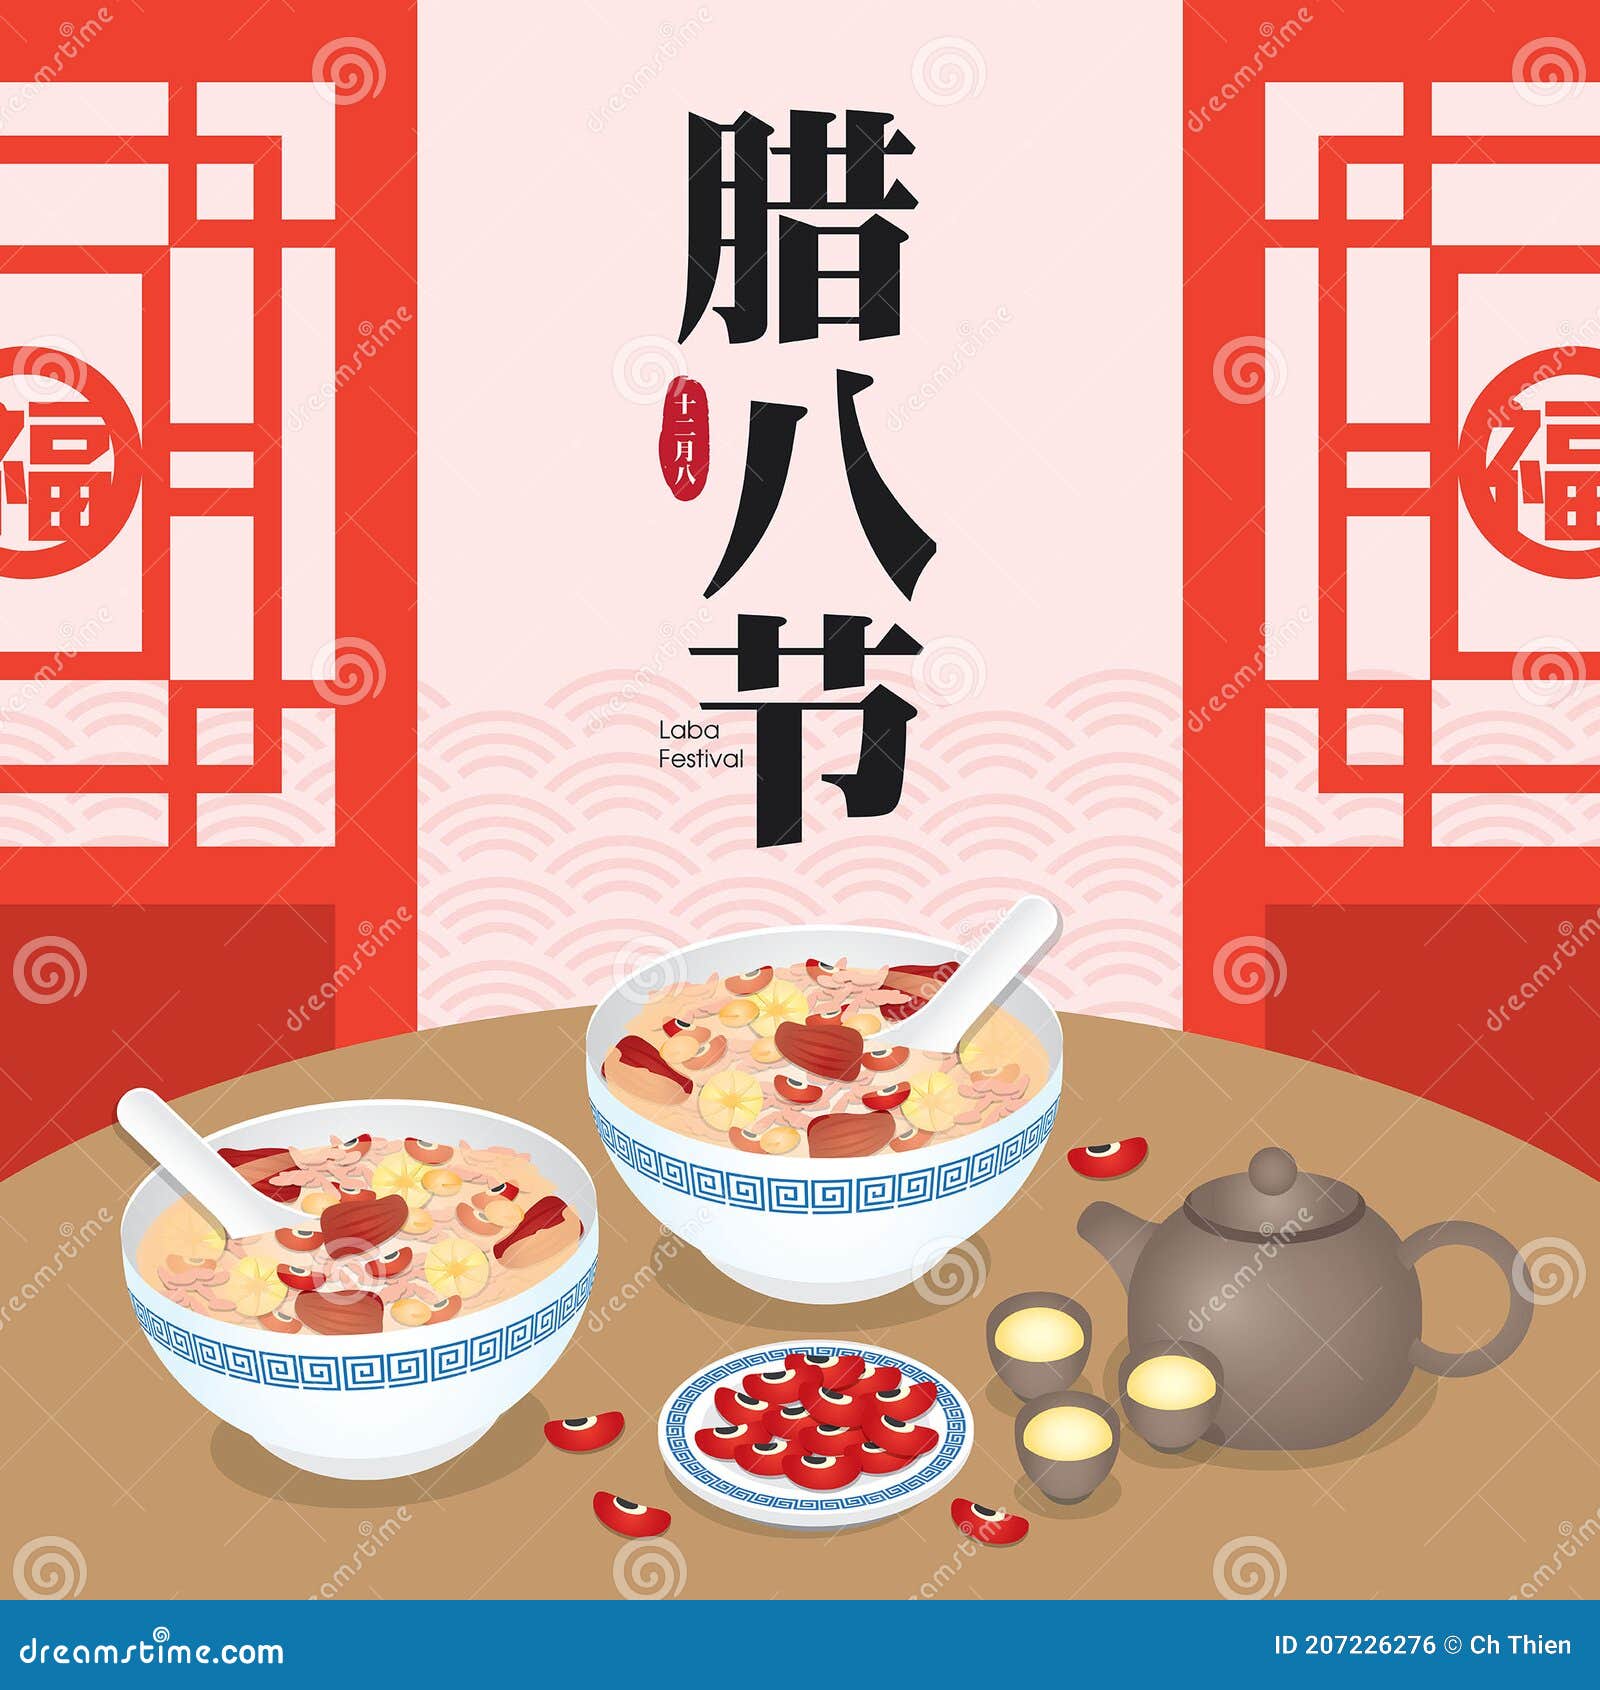 The Laba Rice Porridge Banner Illustration Also As Known As Eight